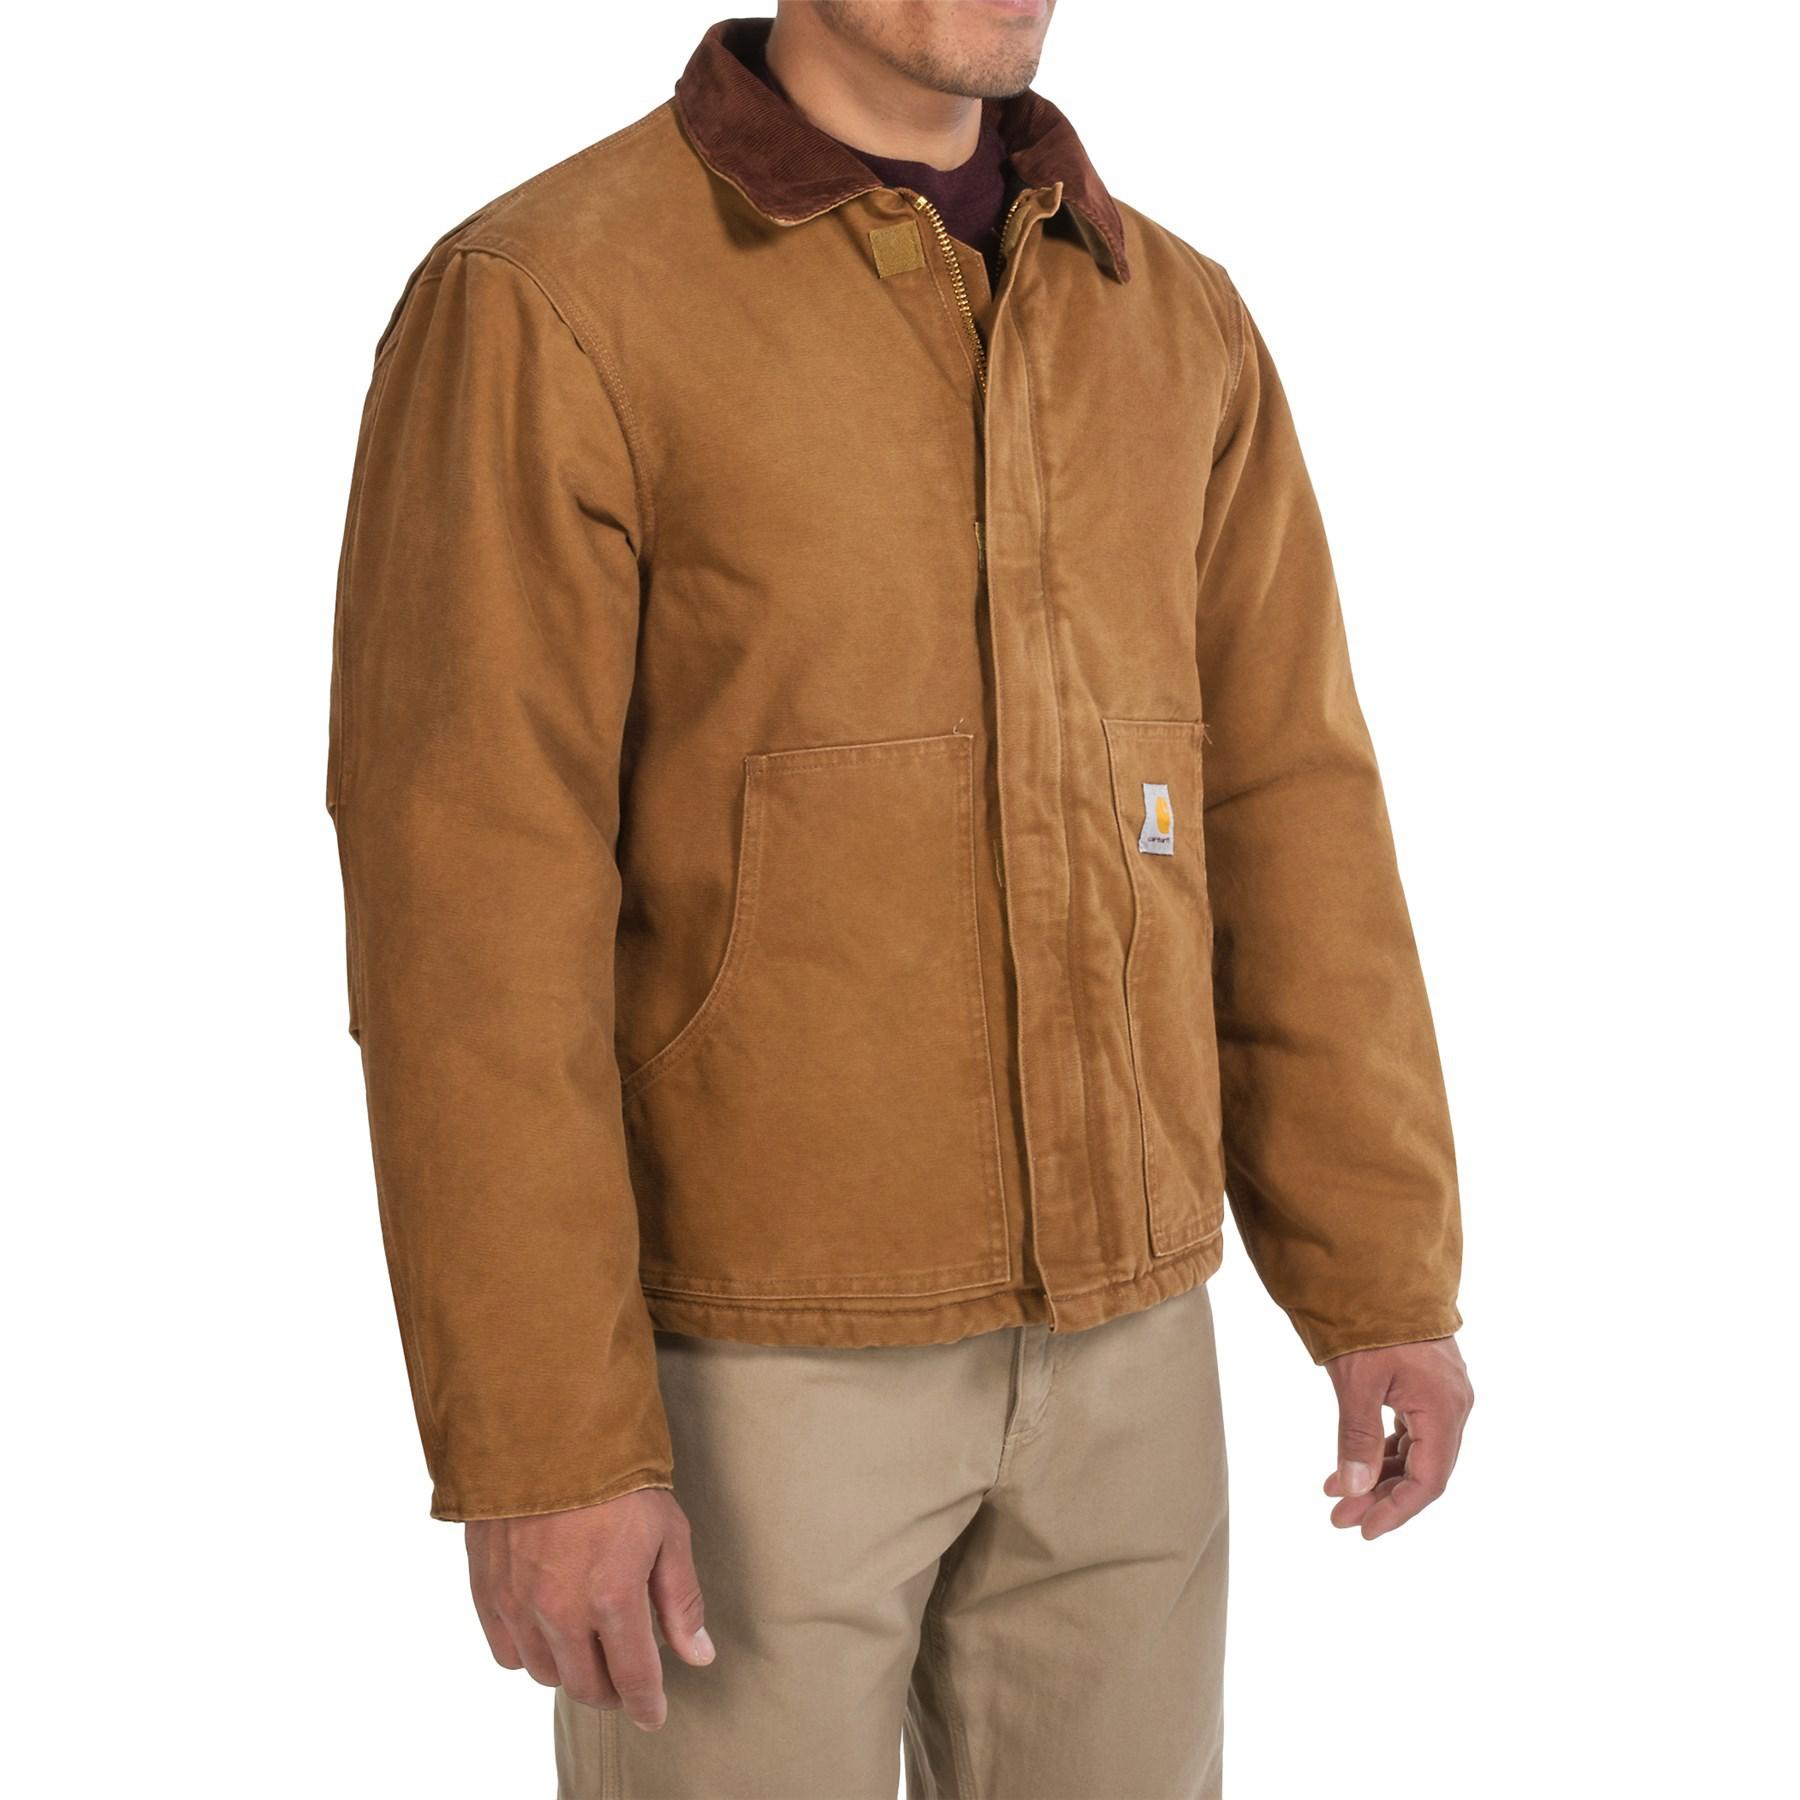 Lyst - Carhartt Sandstone Traditional Arctic Jacket in Brown for Men